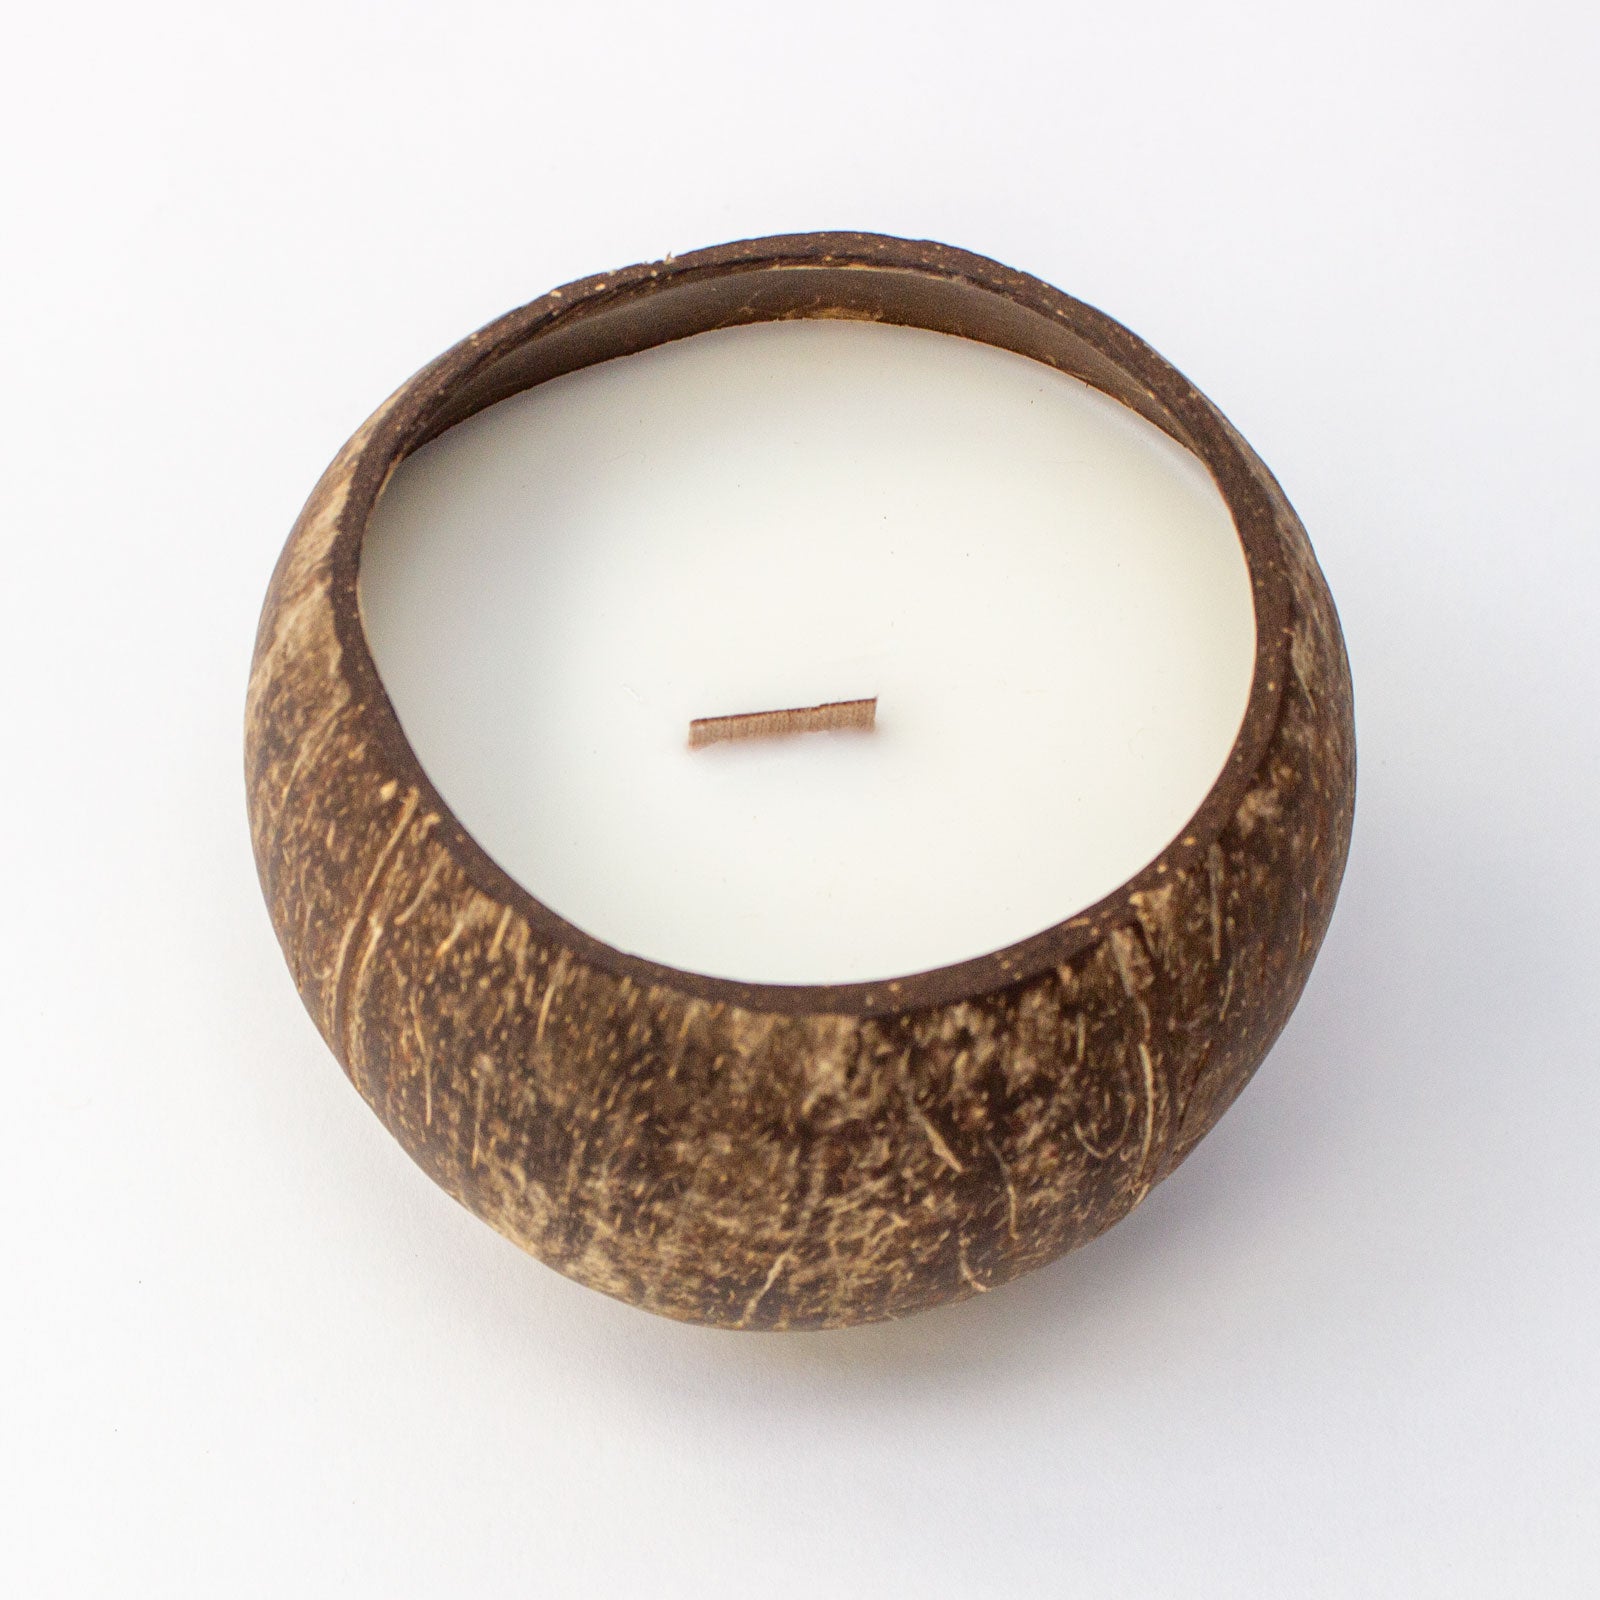 Natural coconut shell hand-poured soy wax scented candle